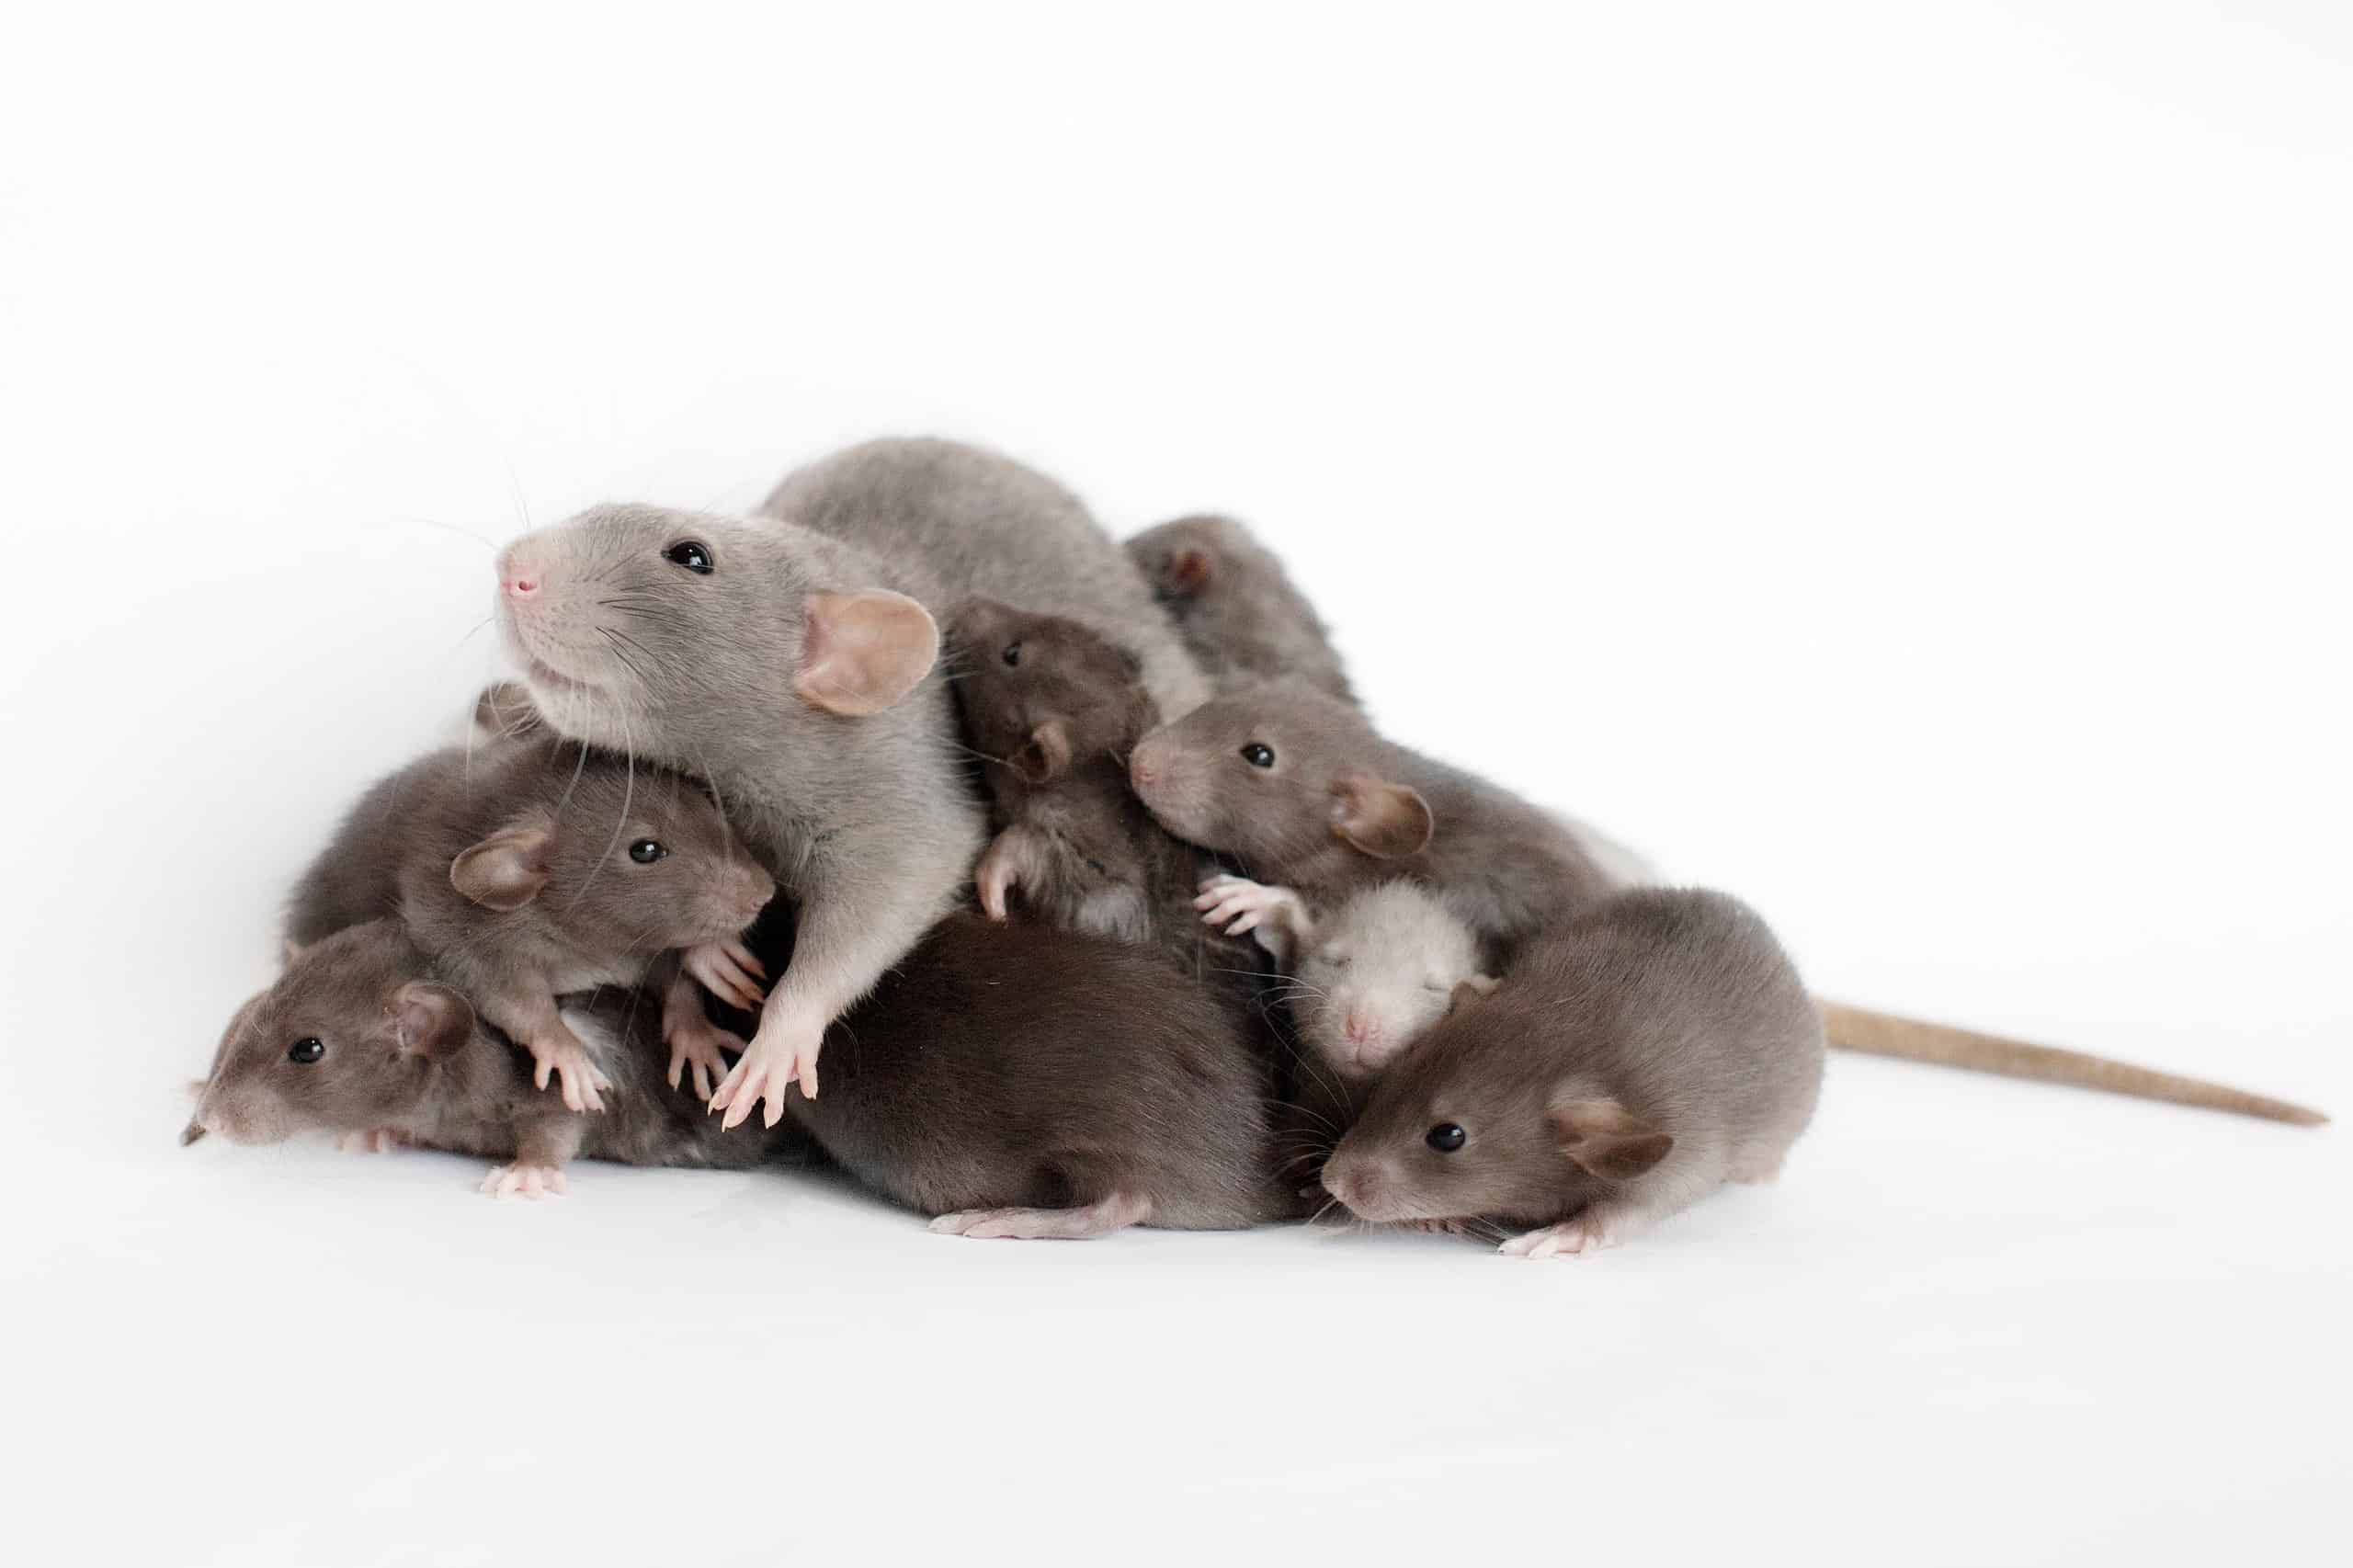 A female rat snuggling with her many babies against a white background